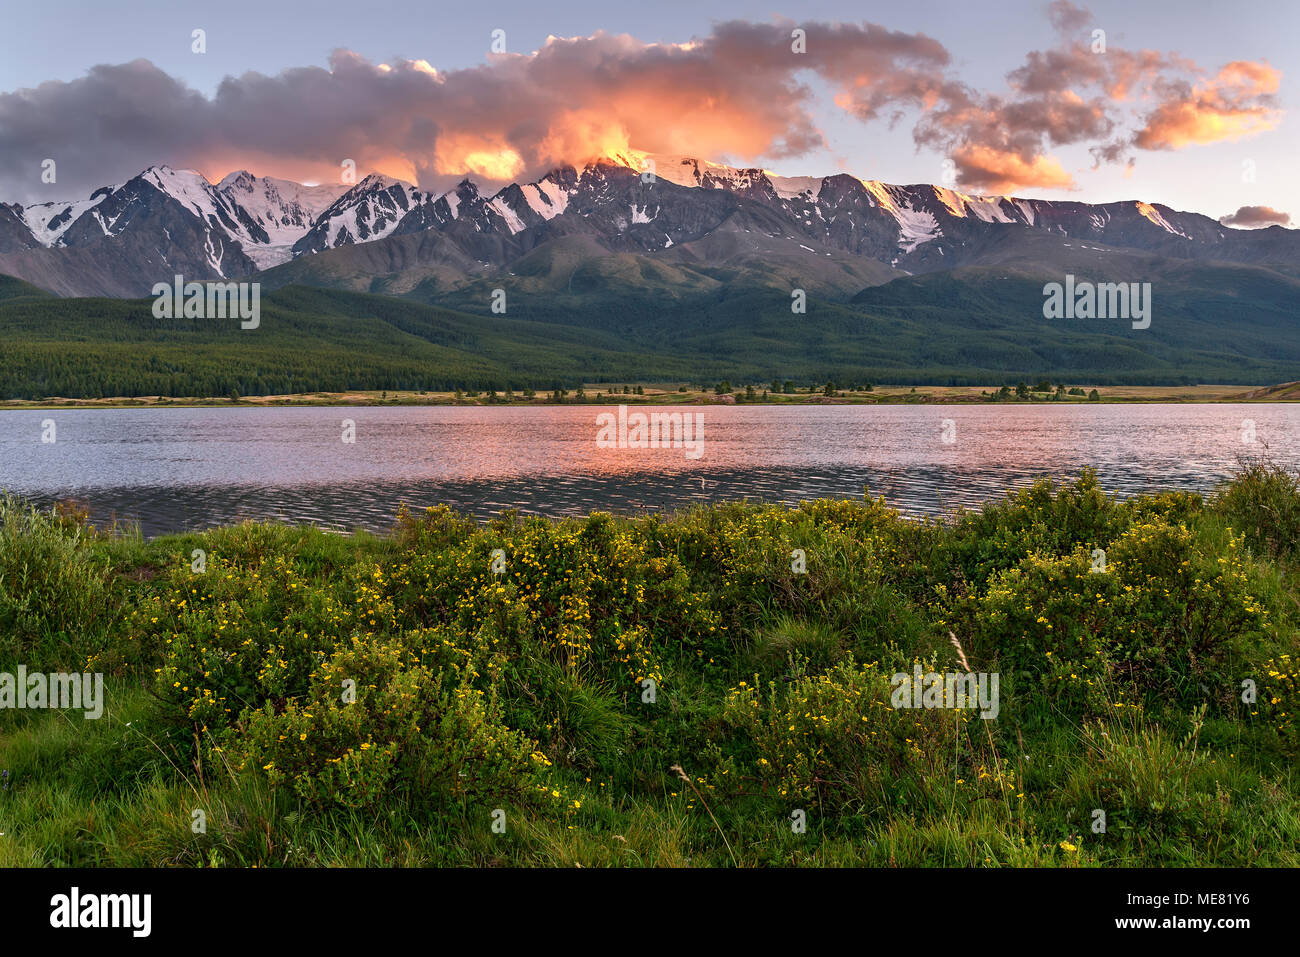 Amazing landscape with mountains, snow and forest on the slopes, bushes of Kuril tea on the shore of the lake and pink clouds at sunset Stock Photo